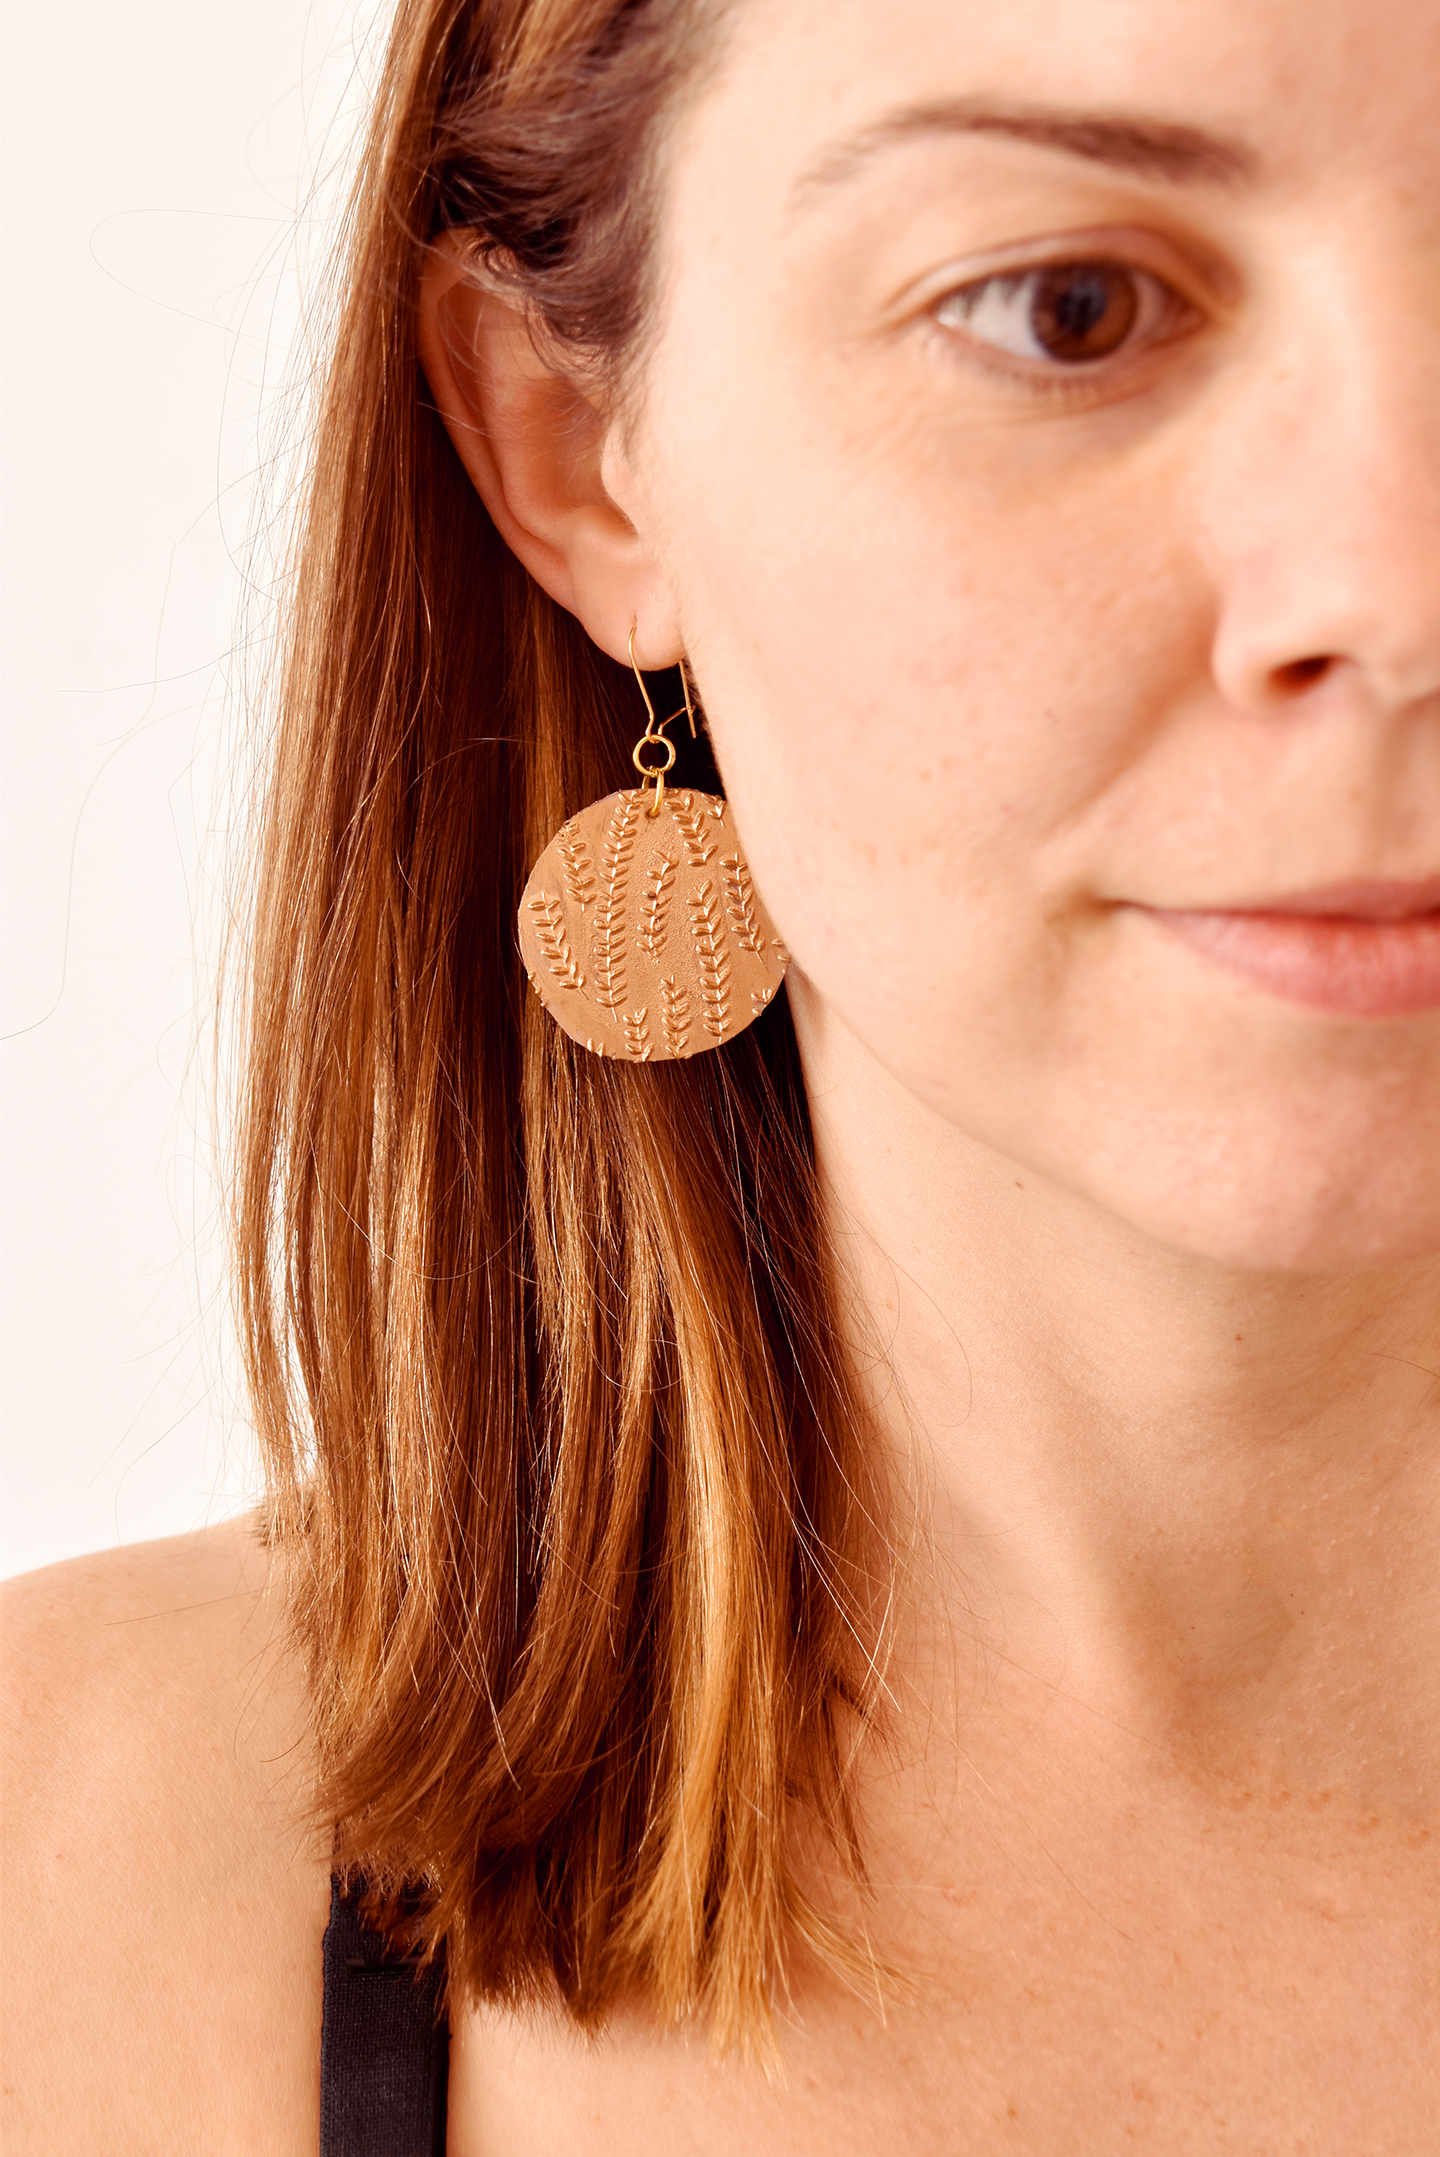 DIY Rubber Stamp and Hot Glue Earrings /// By Faith Towers Provencher of Design Fixation #unique #botanical #pendant